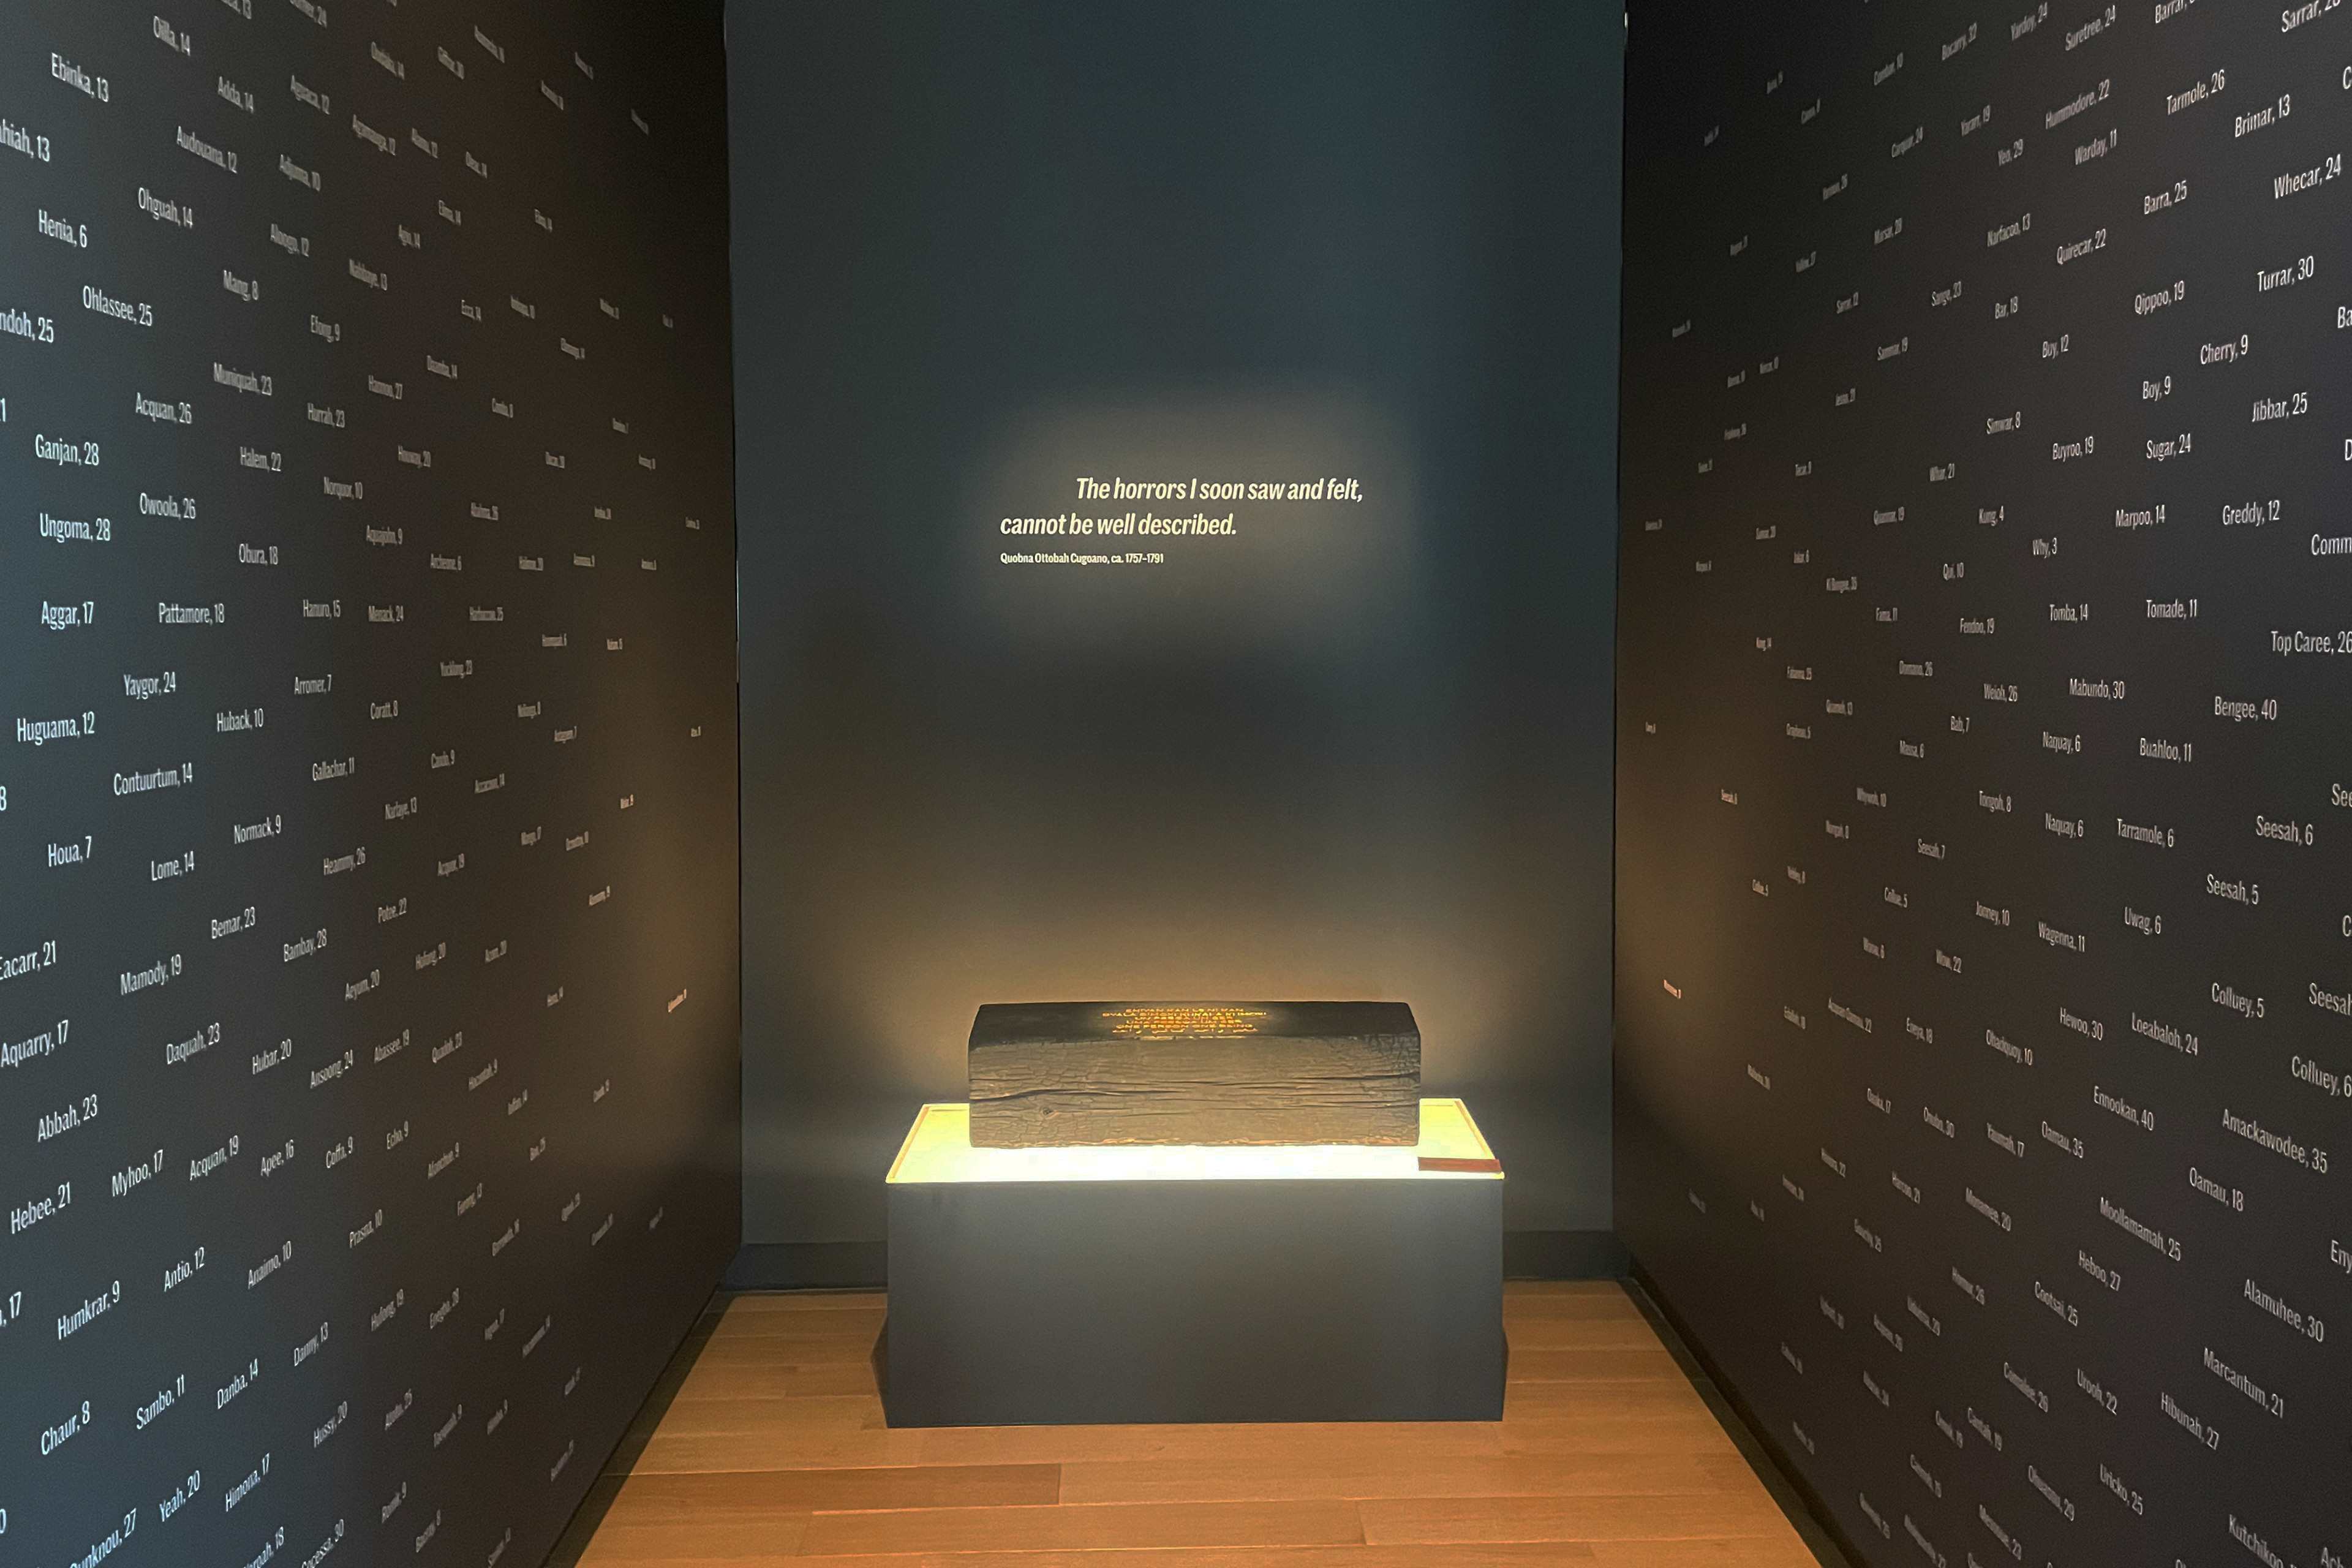 A photo of an exhibit with a quote on a wall that reads, "The horrors I soon saw and felt cannot be well described." On the walls surrounding the quote are the names and ages of enslaved people.